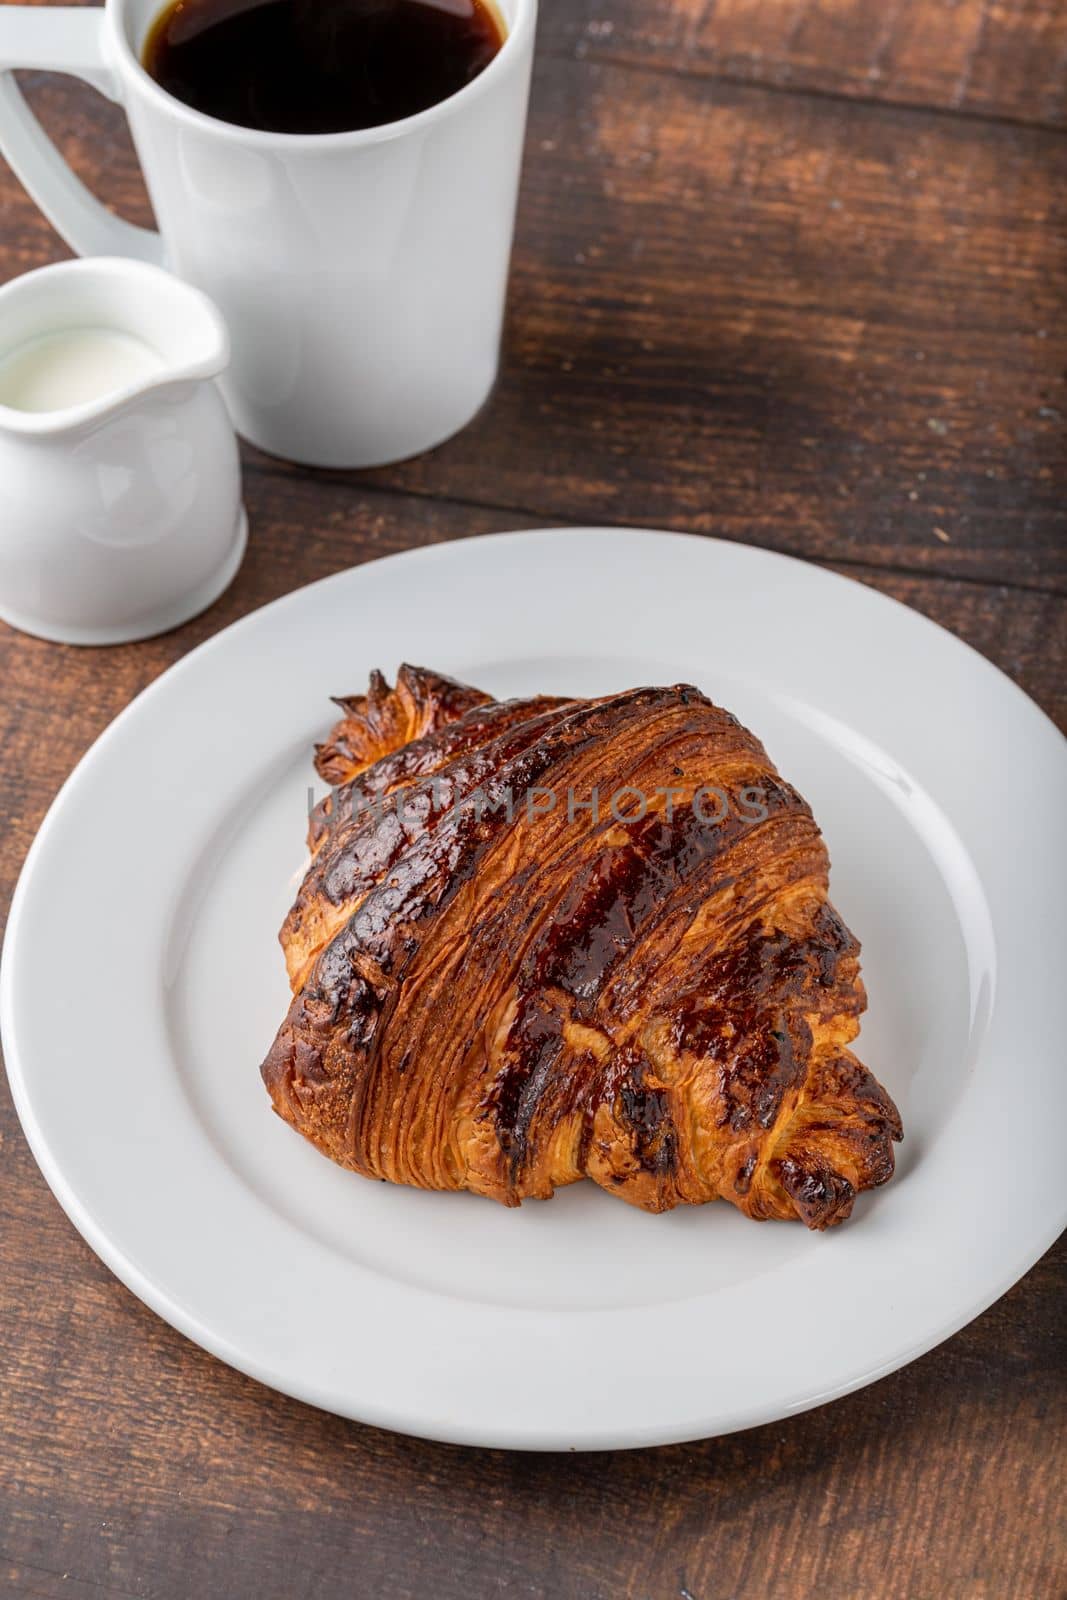 Croissant with coffee next to it on wooden table by Sonat